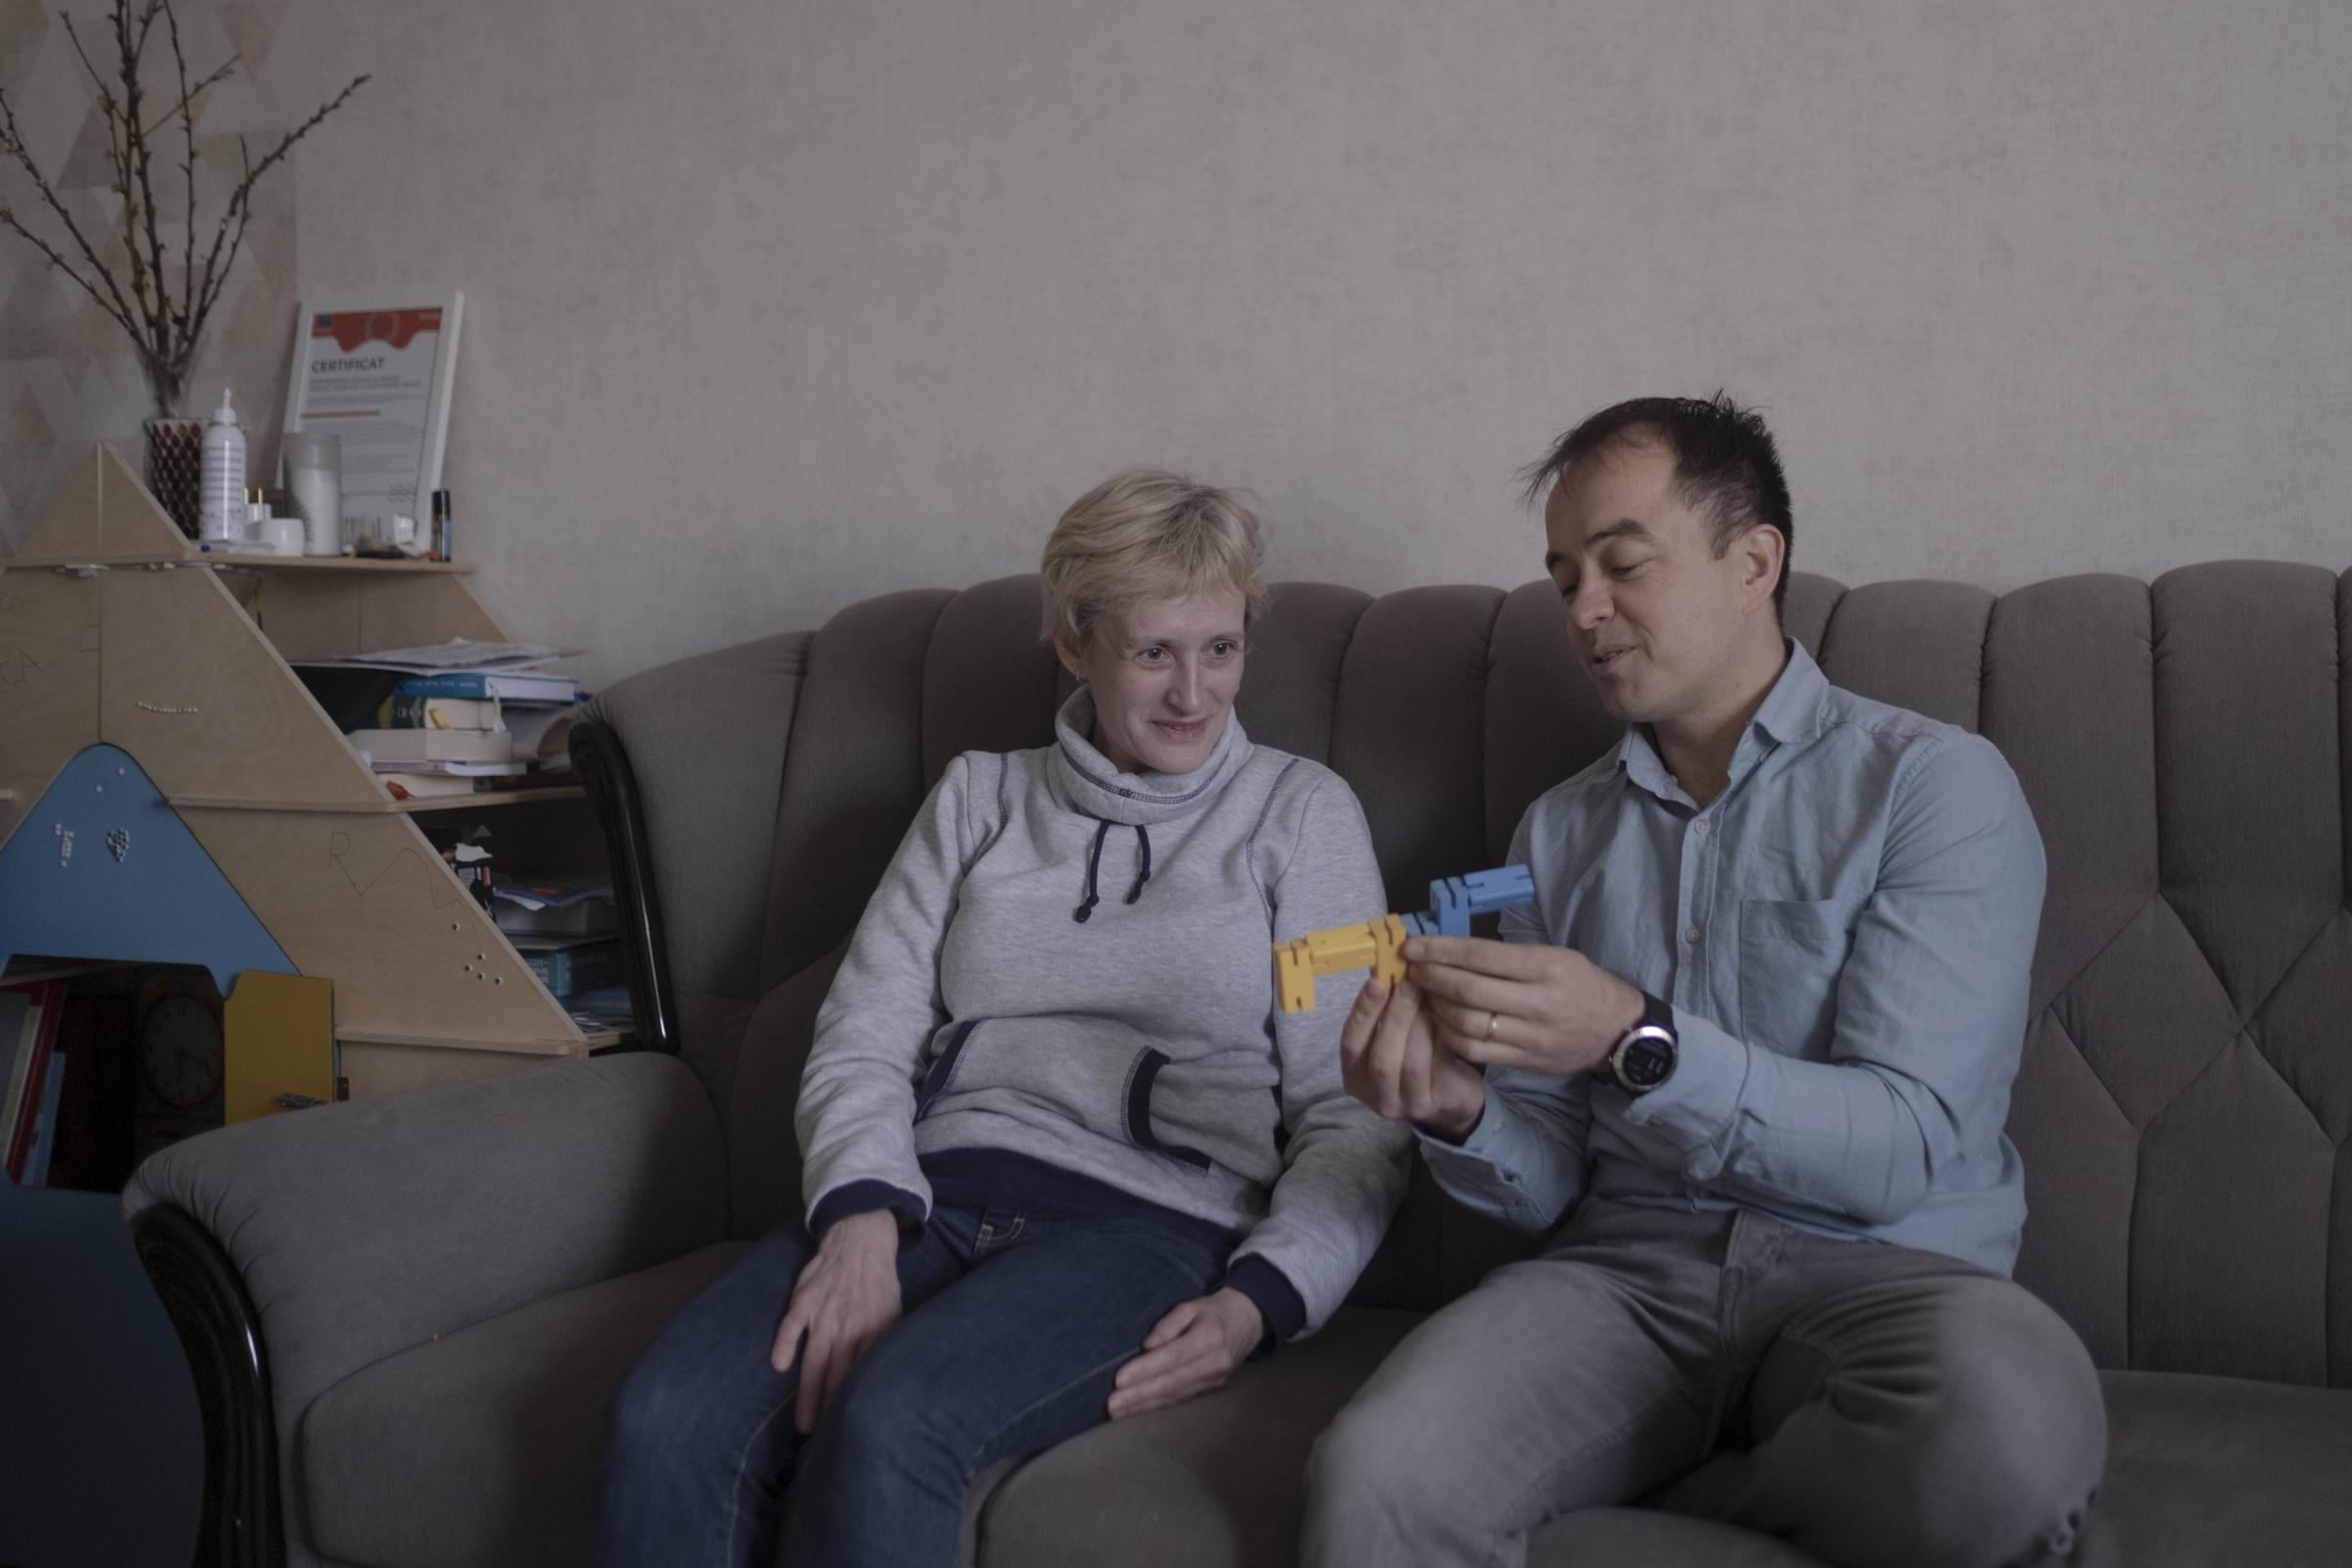 Moldovans who sheltered Ukrainian refugees at home - Igor is showing Edita a wooden toy painted in yellow and...